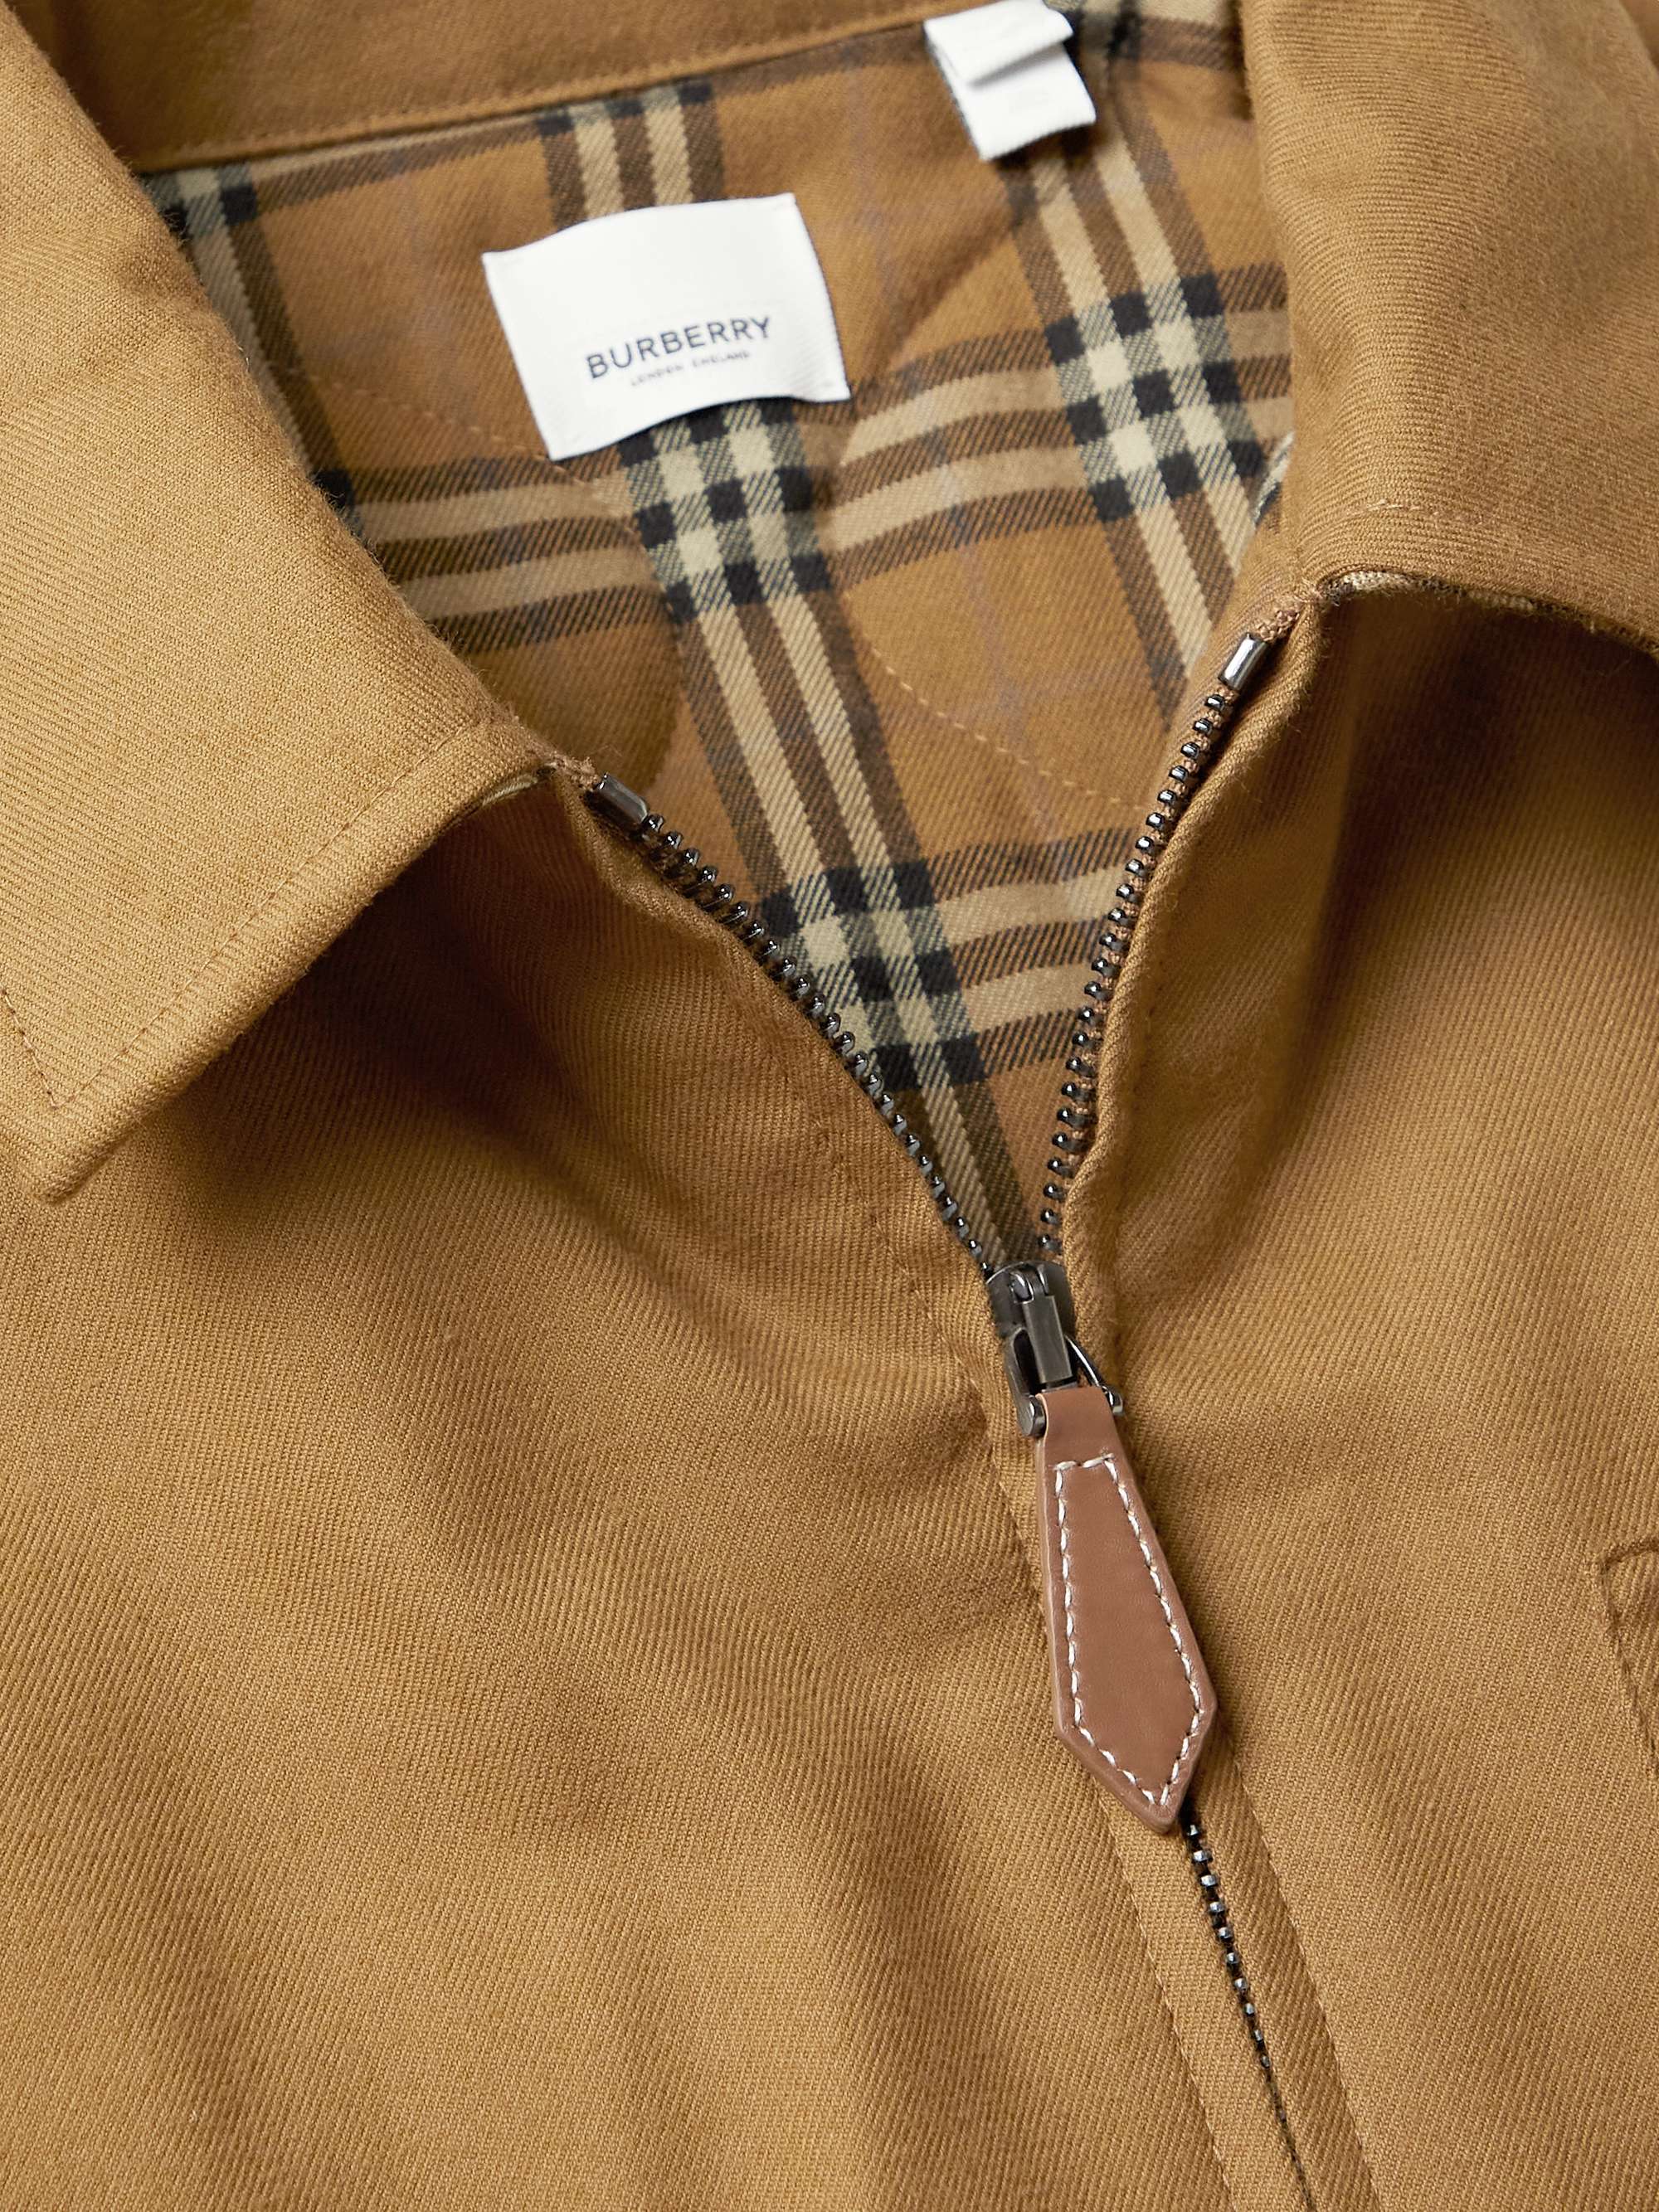 BURBERRY Padded Cotton-Twill Jacket